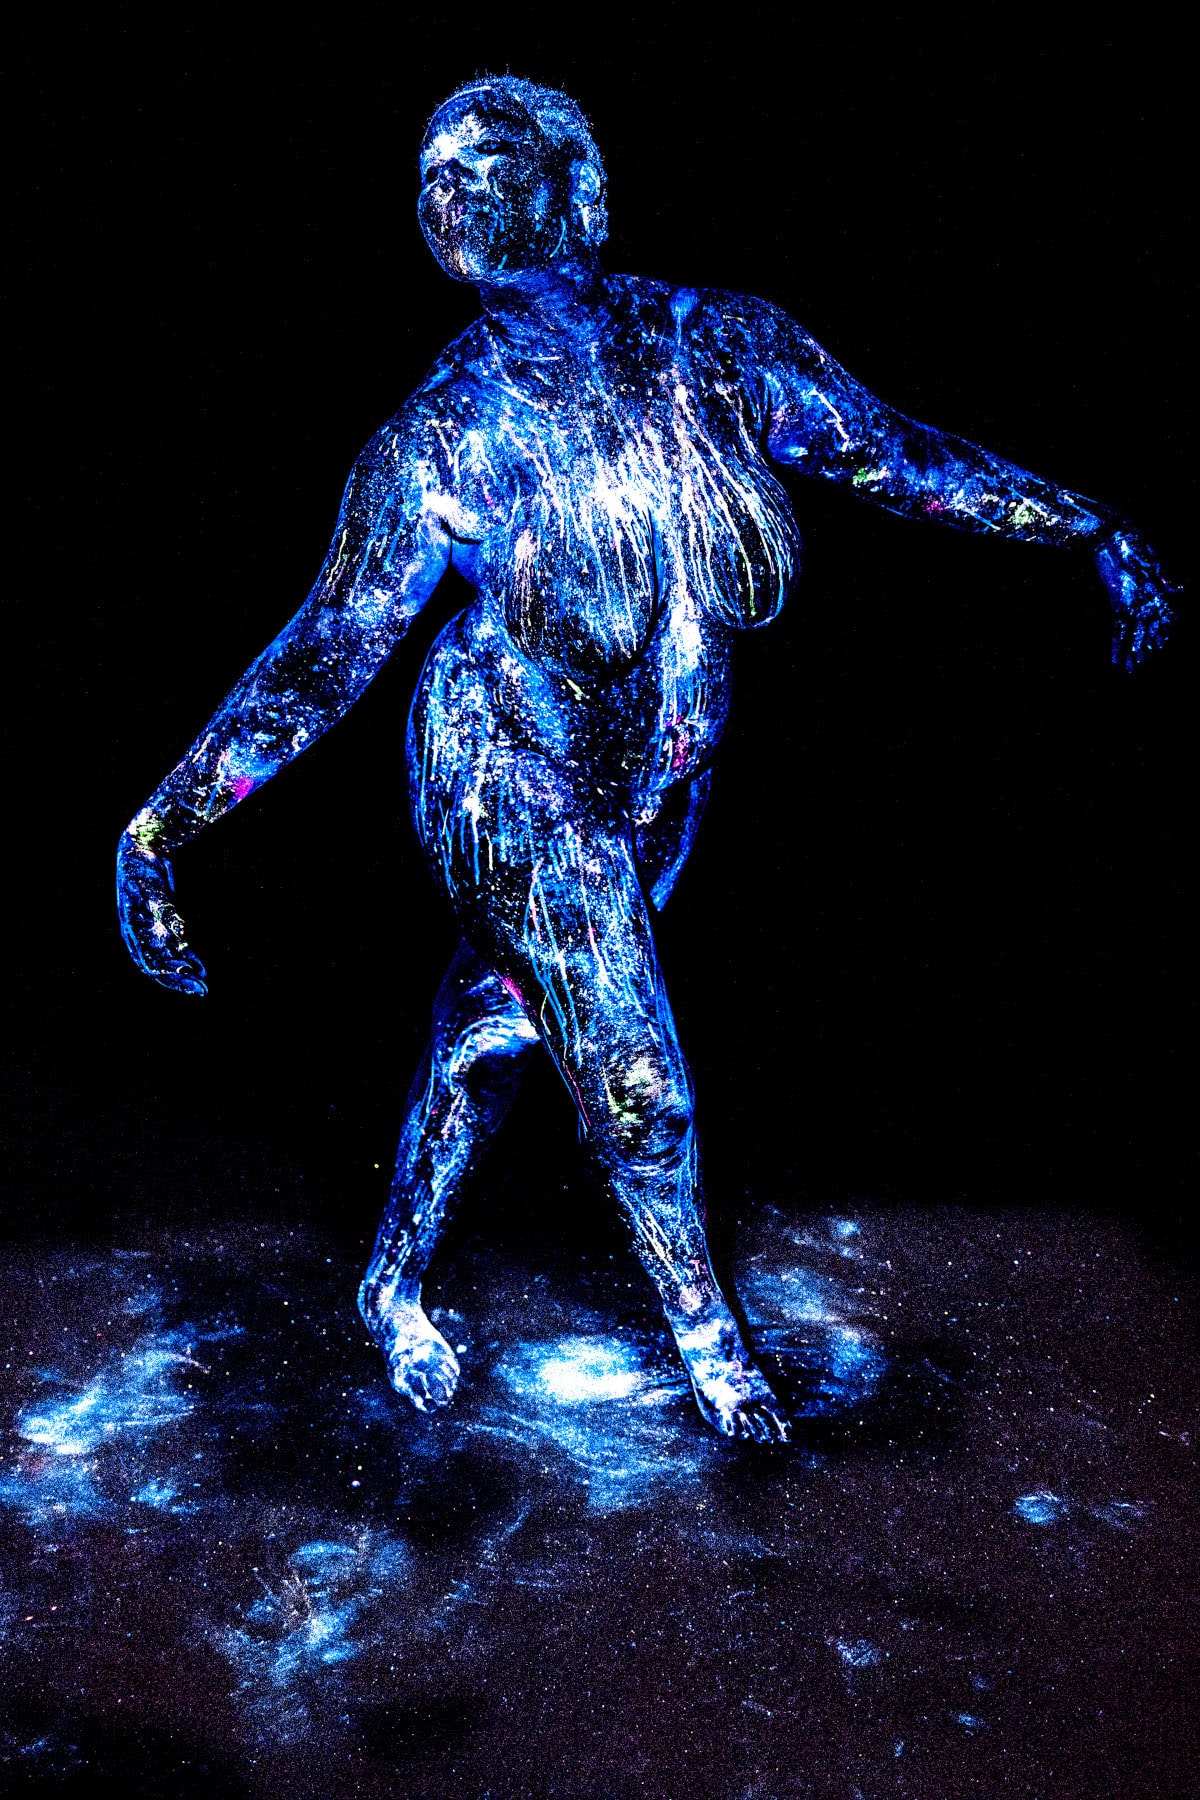 UV light artistic photography by Mikael Owunna